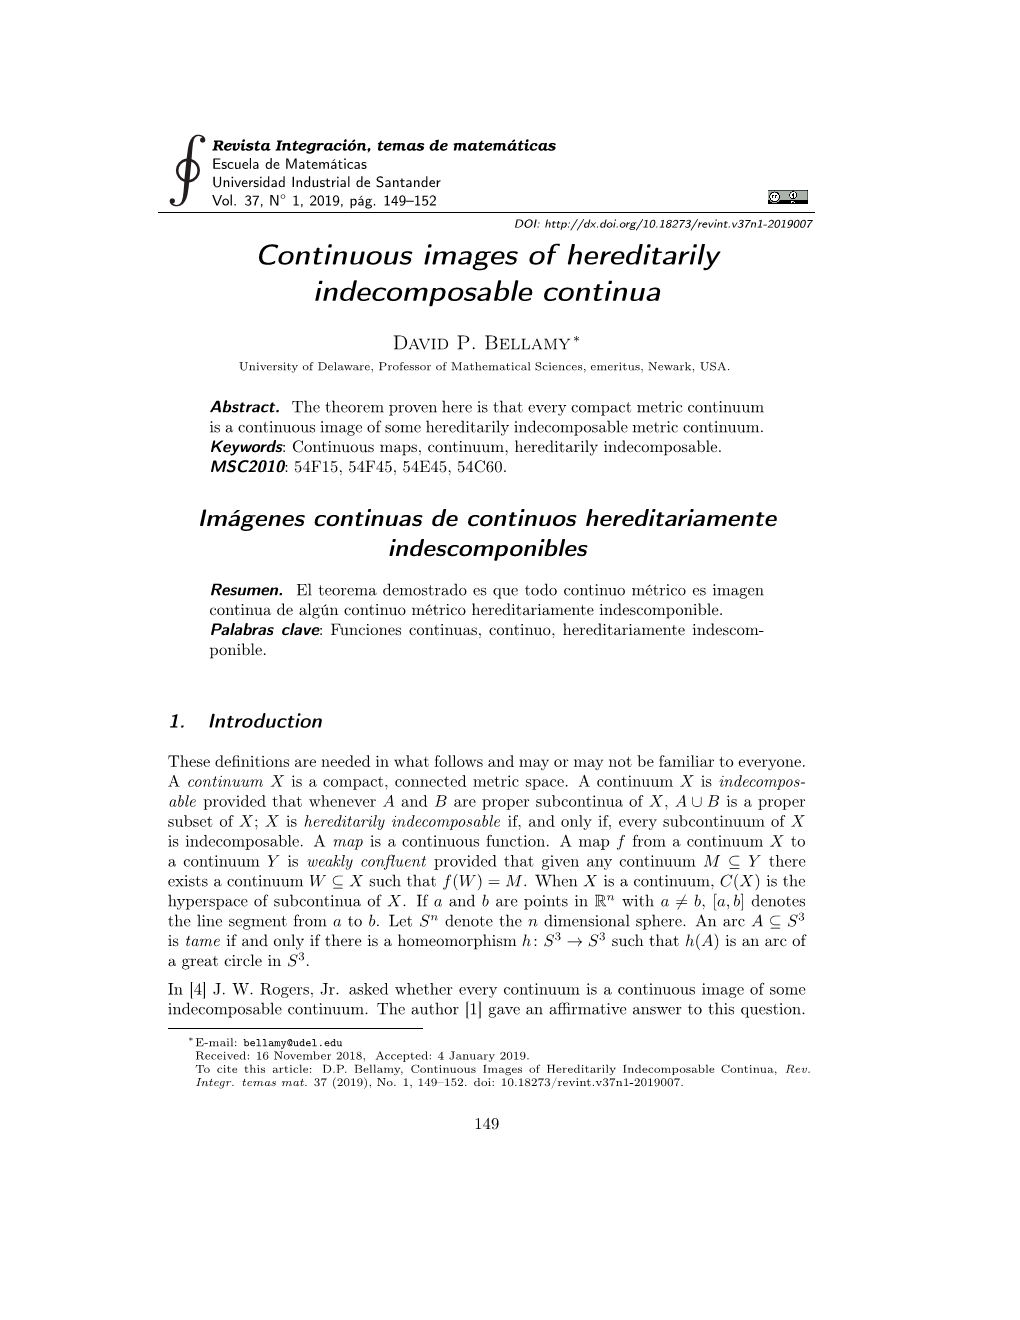 Continuous Images of Hereditarily Indecomposable Continua